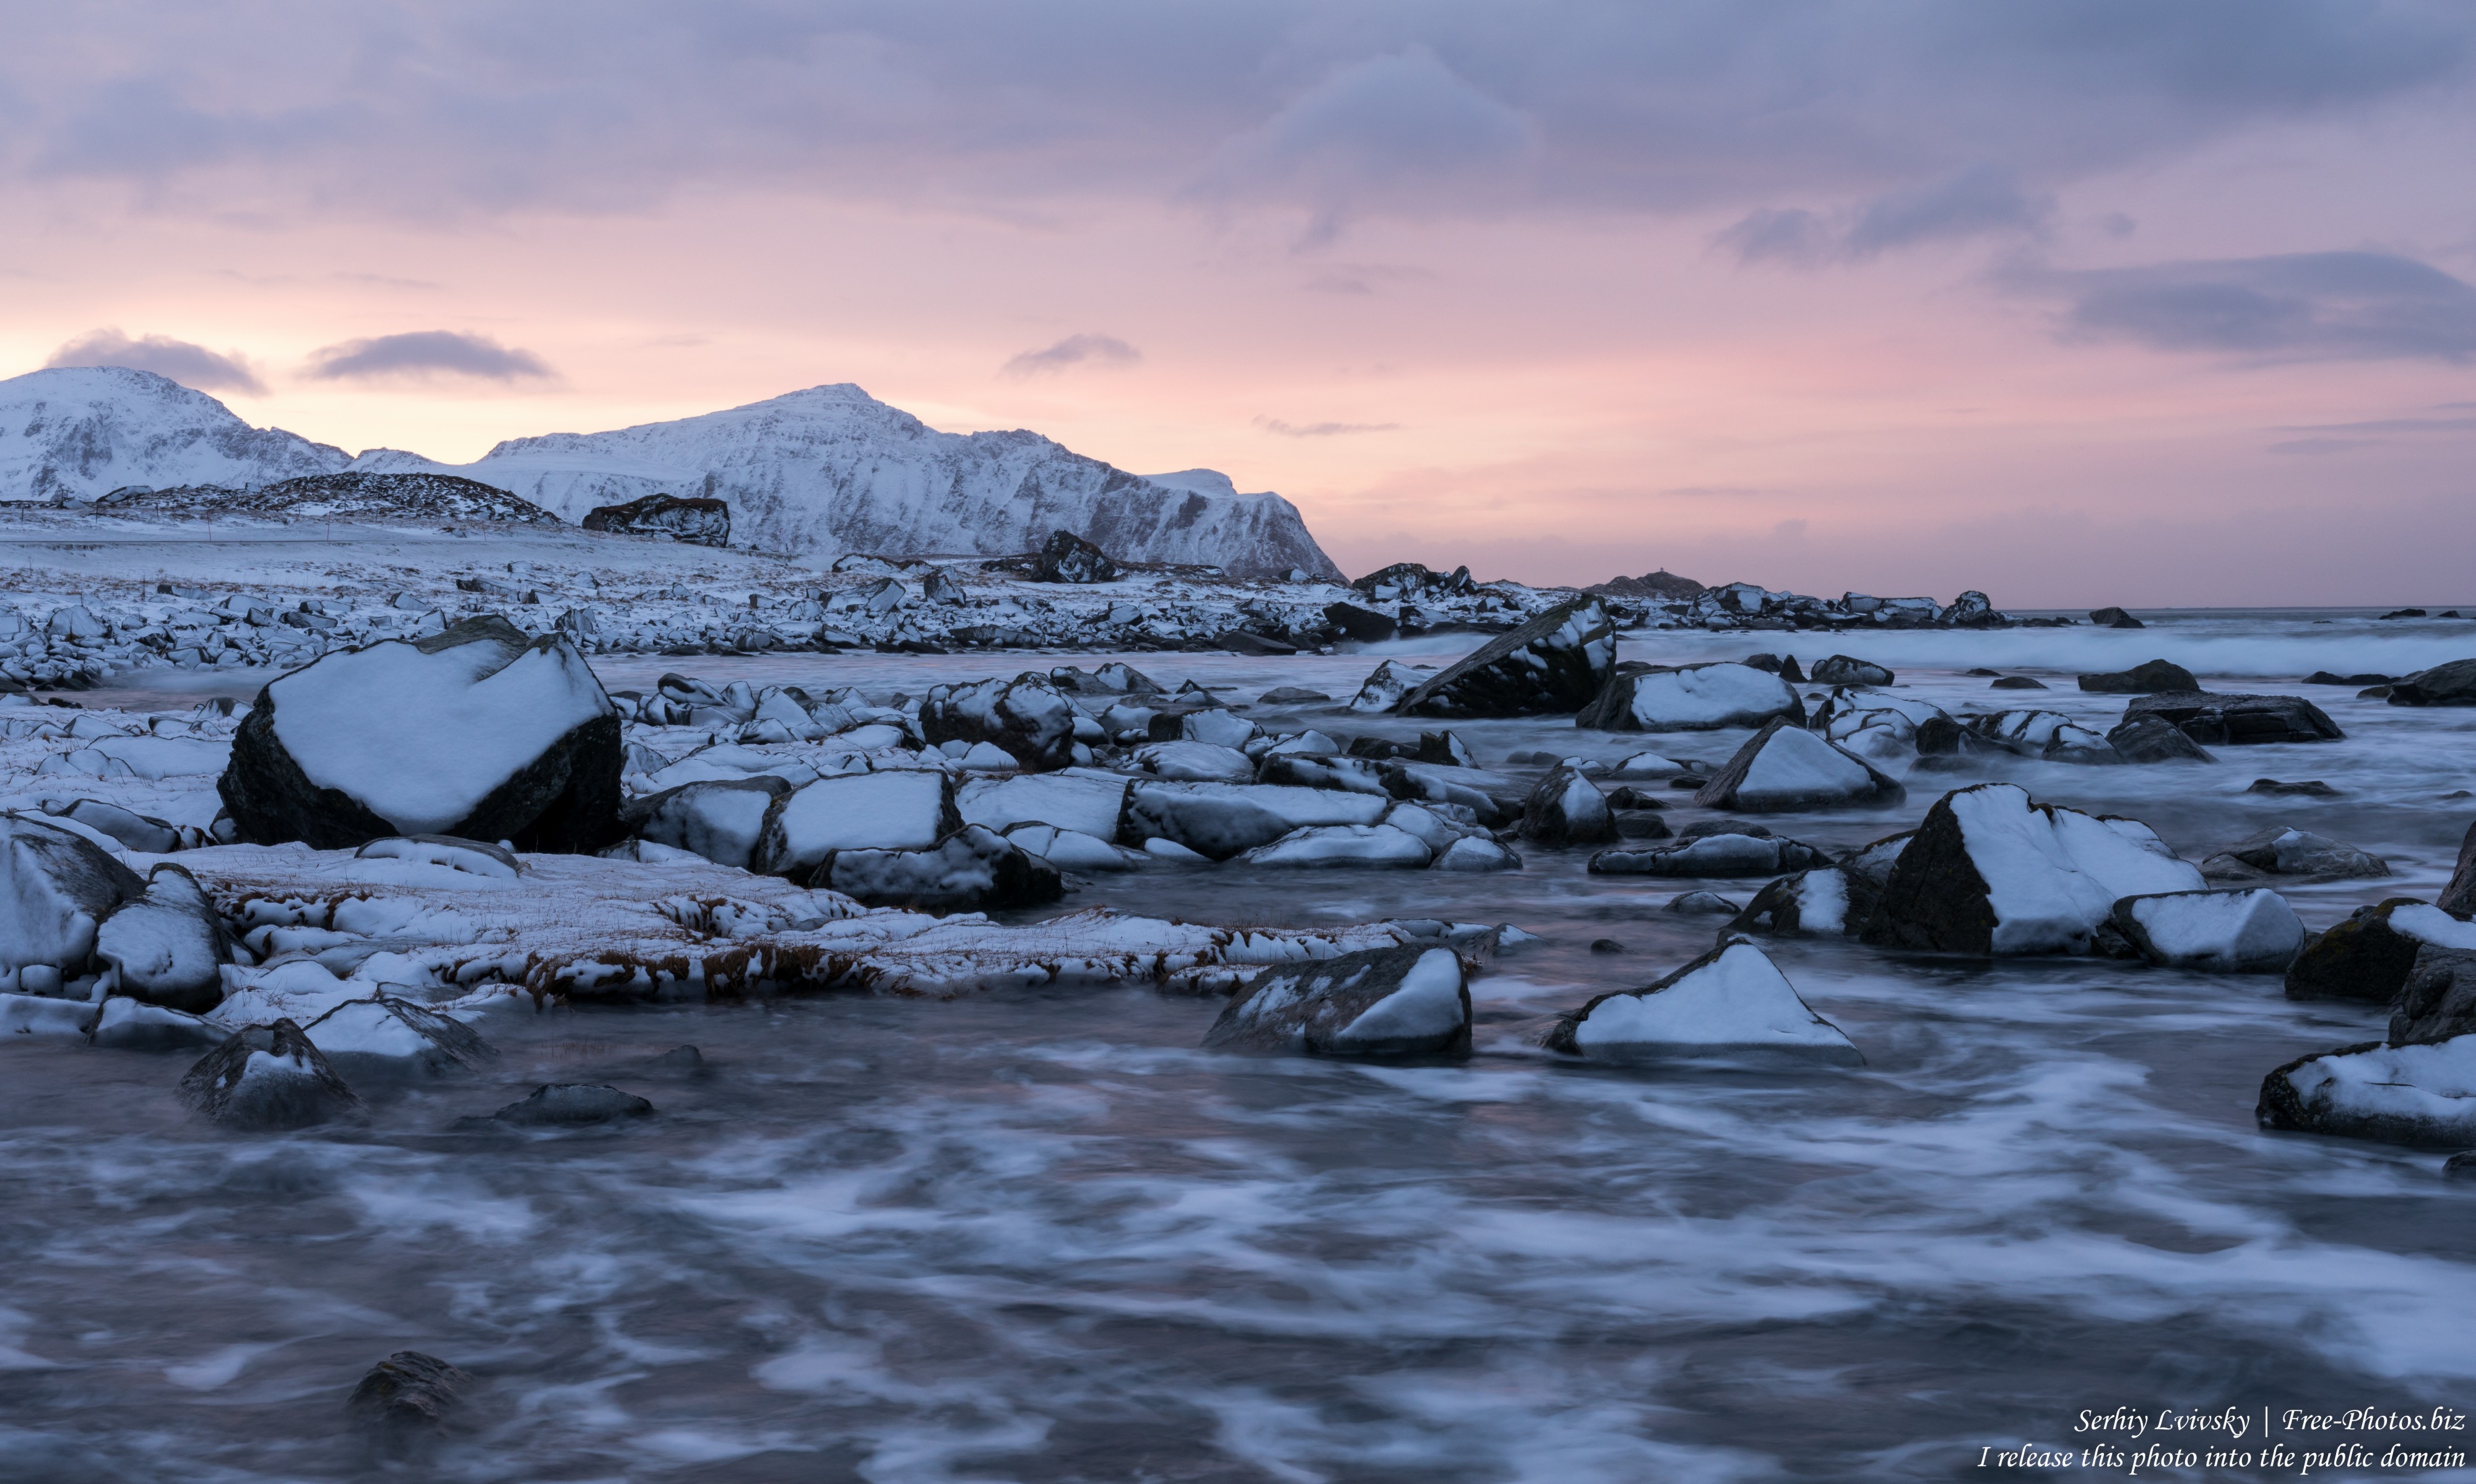 Skagsanden beach, Norway, photographed in February 2020 by Serhiy Lvivsky, picture 3